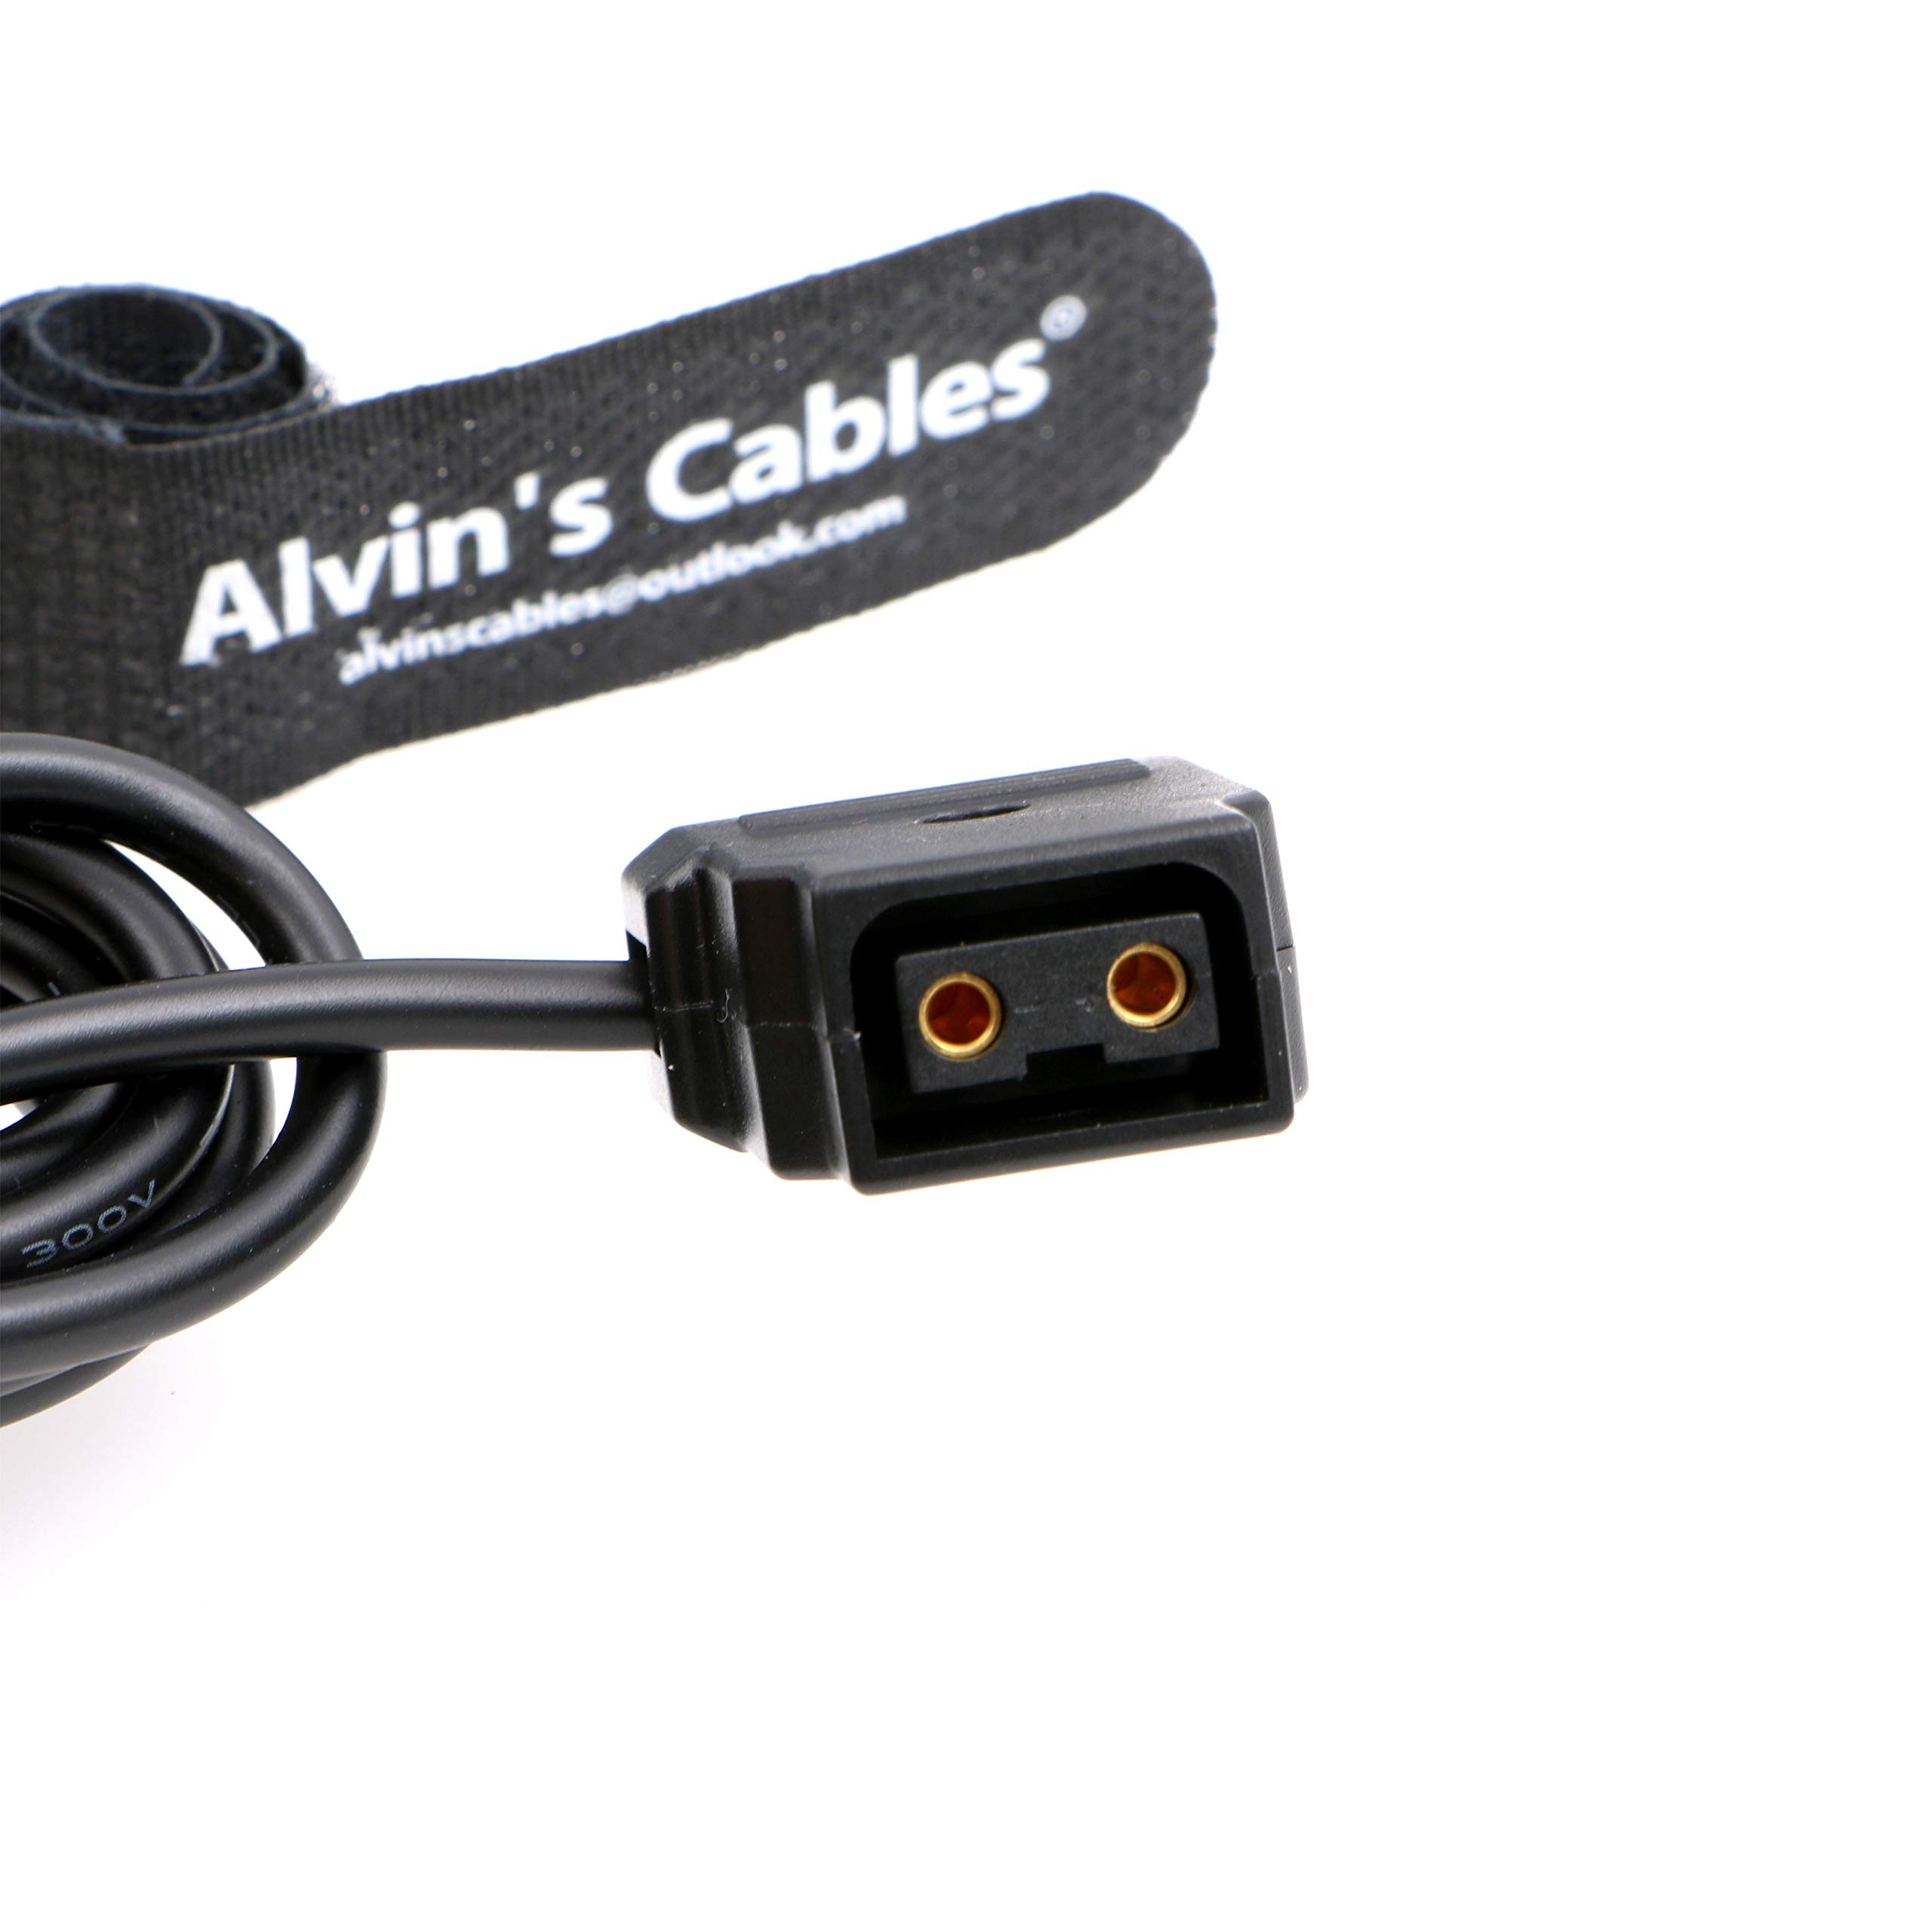 Alvin's Cables Universal AC with UK EU AU US Plugs Adapter Converter Power Cable for Z CAM E2 Flagship Teradek Cube Hollyland Cosmo 600